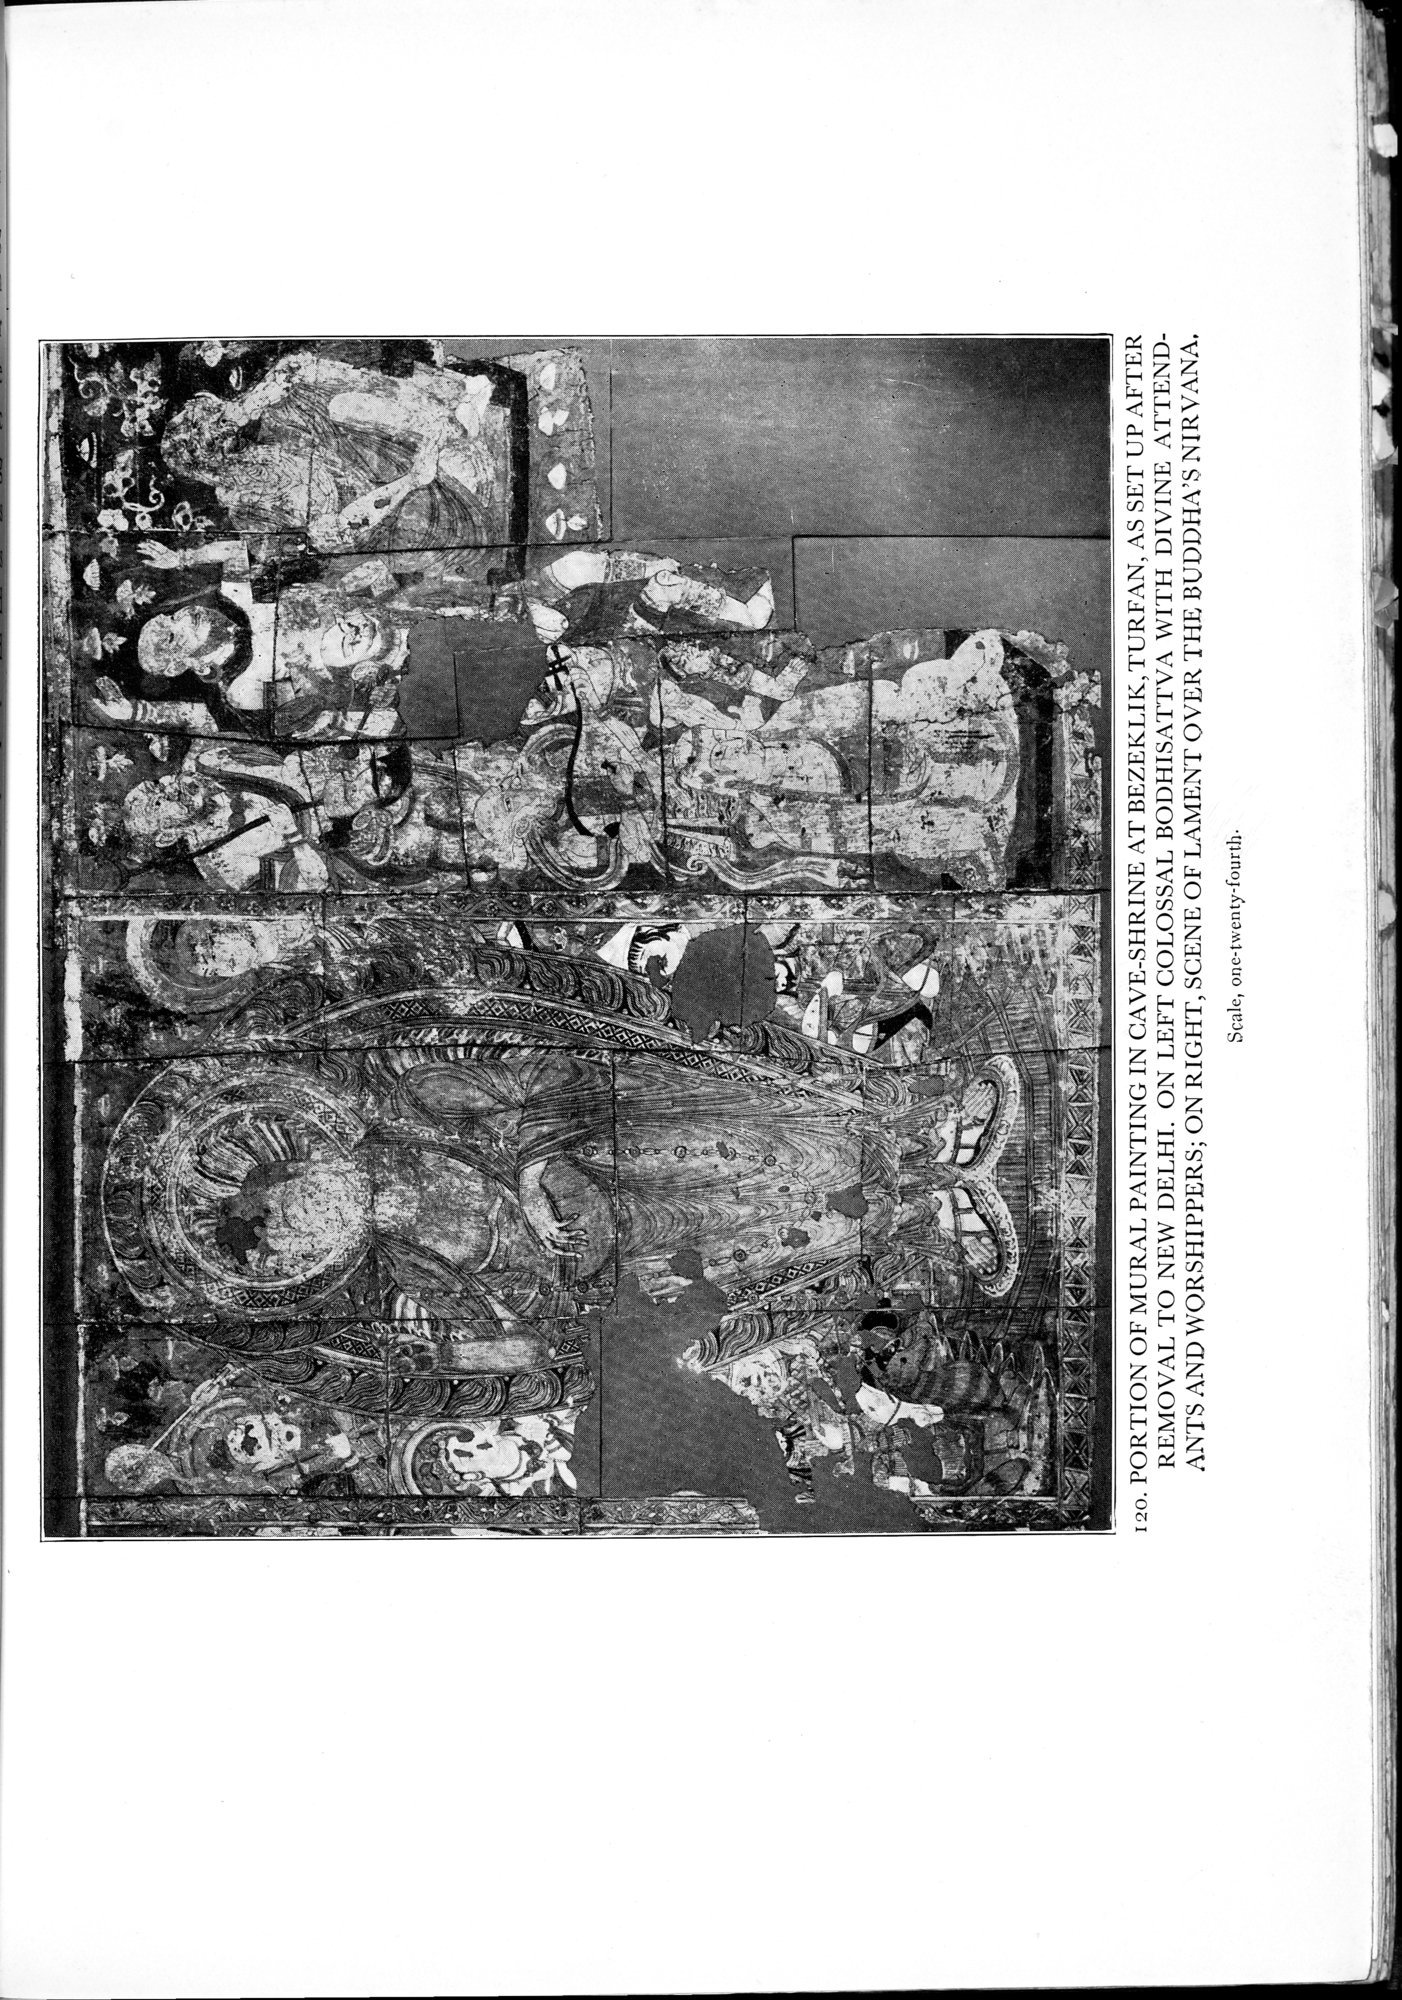 On Ancient Central-Asian Tracks : vol.1 / Page 459 (Grayscale High Resolution Image)